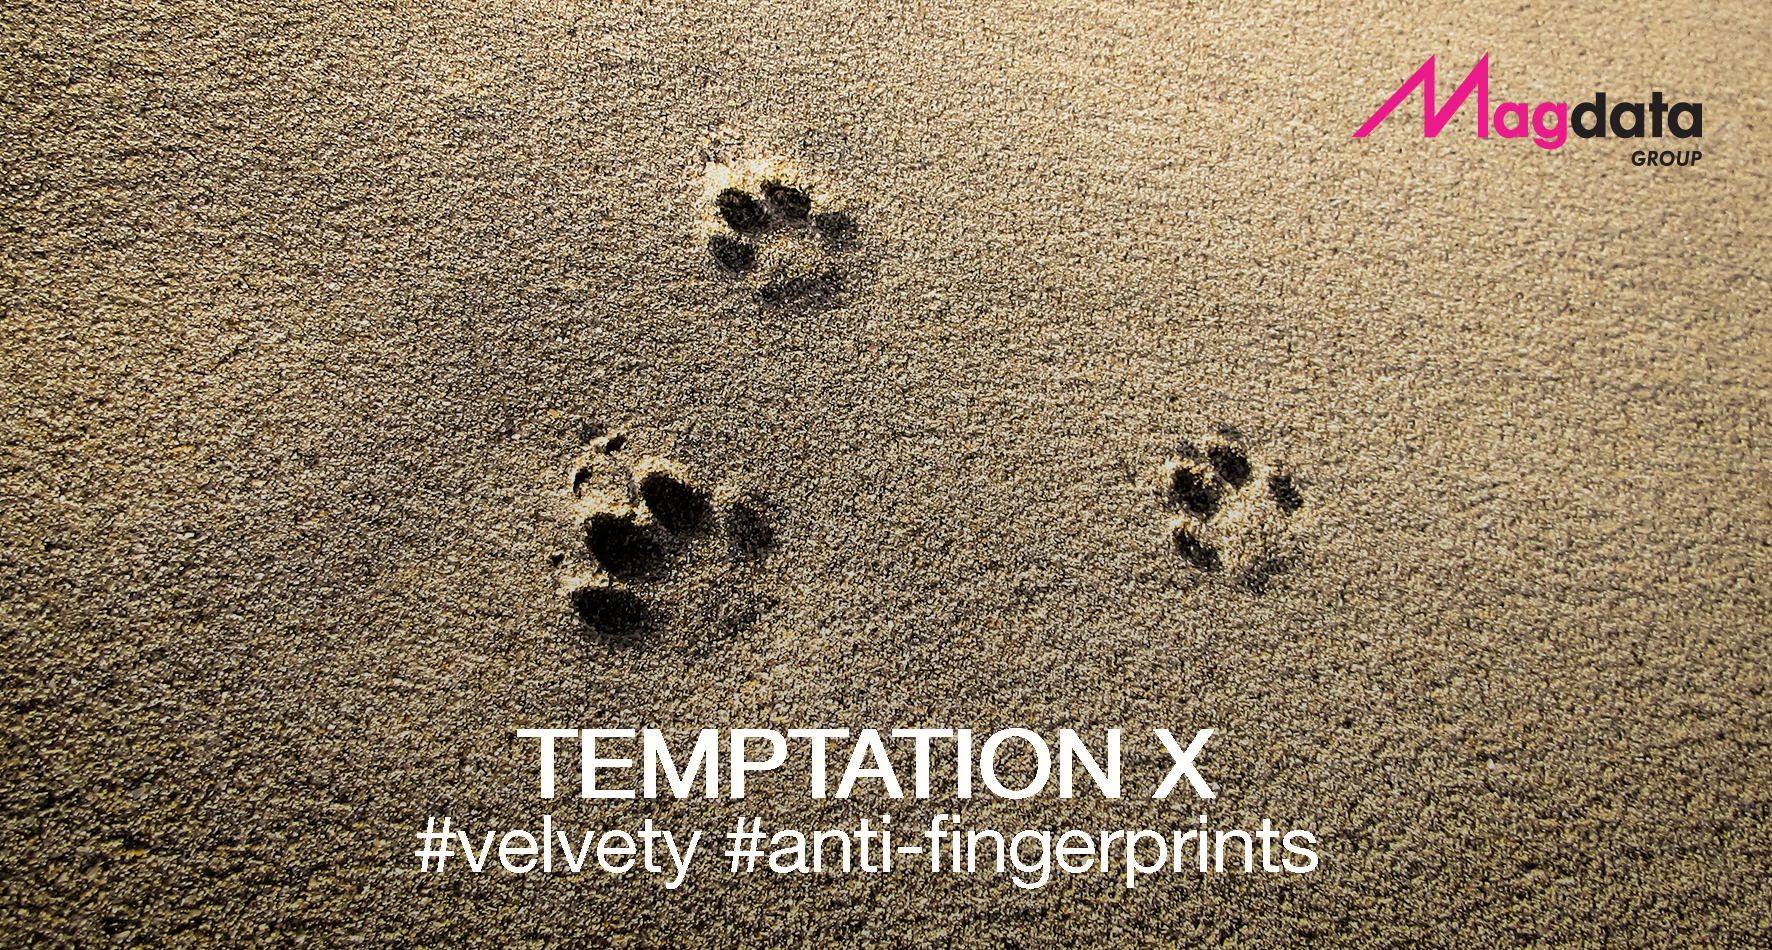 NEW TEMPTATION X, the soft film with a good fingerprint and scratch resistance